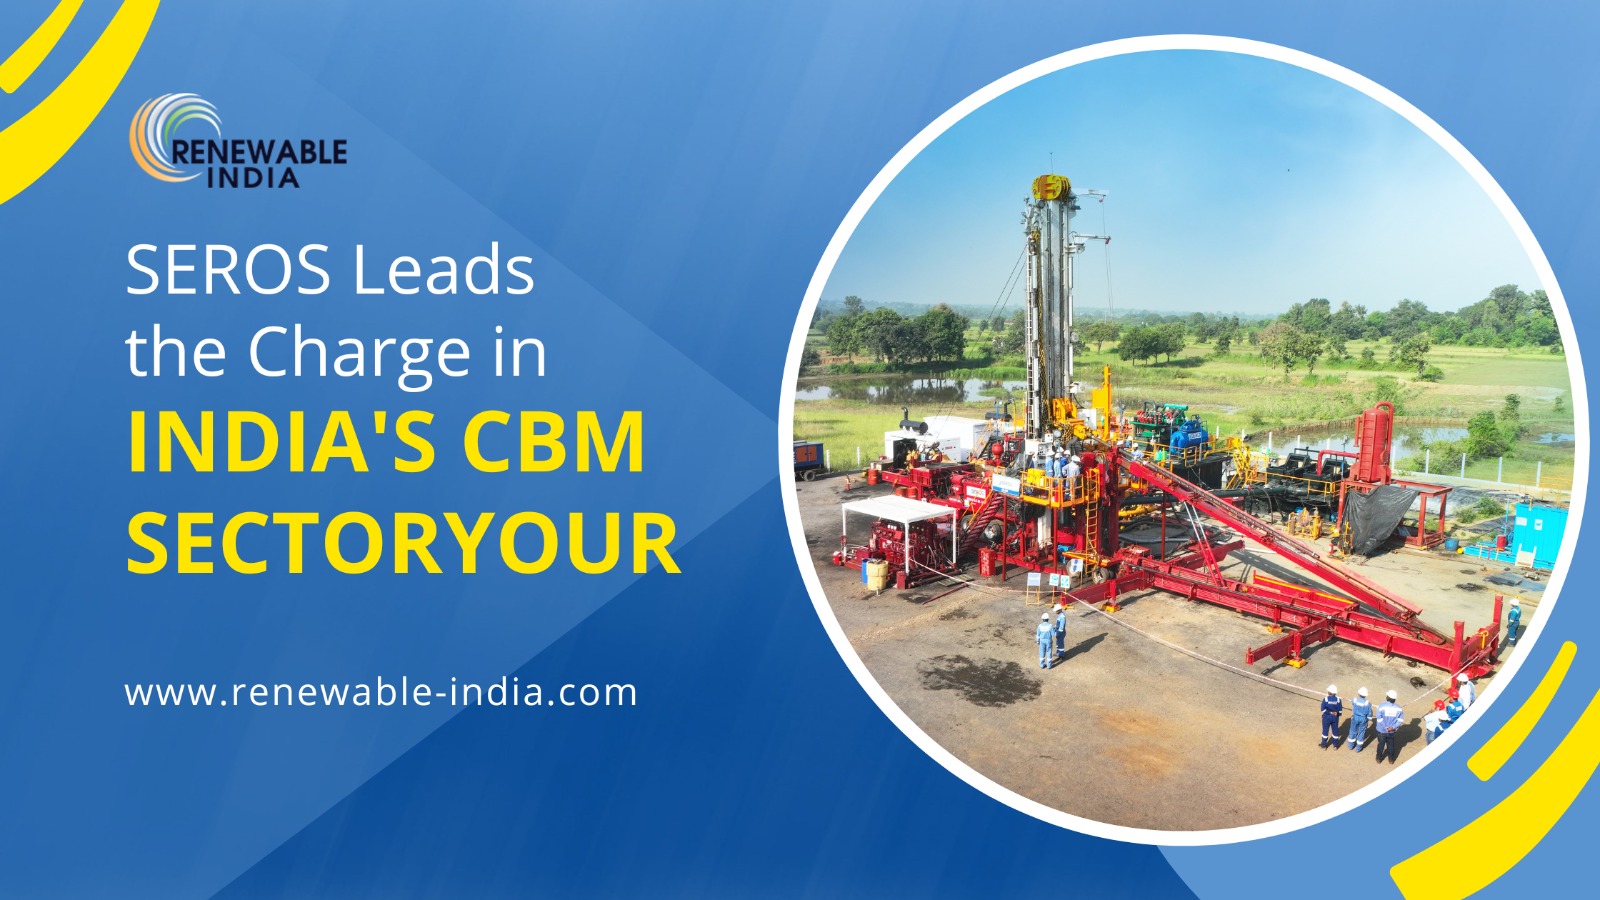 SEROS at the forefront of CBM exploration efforts in India